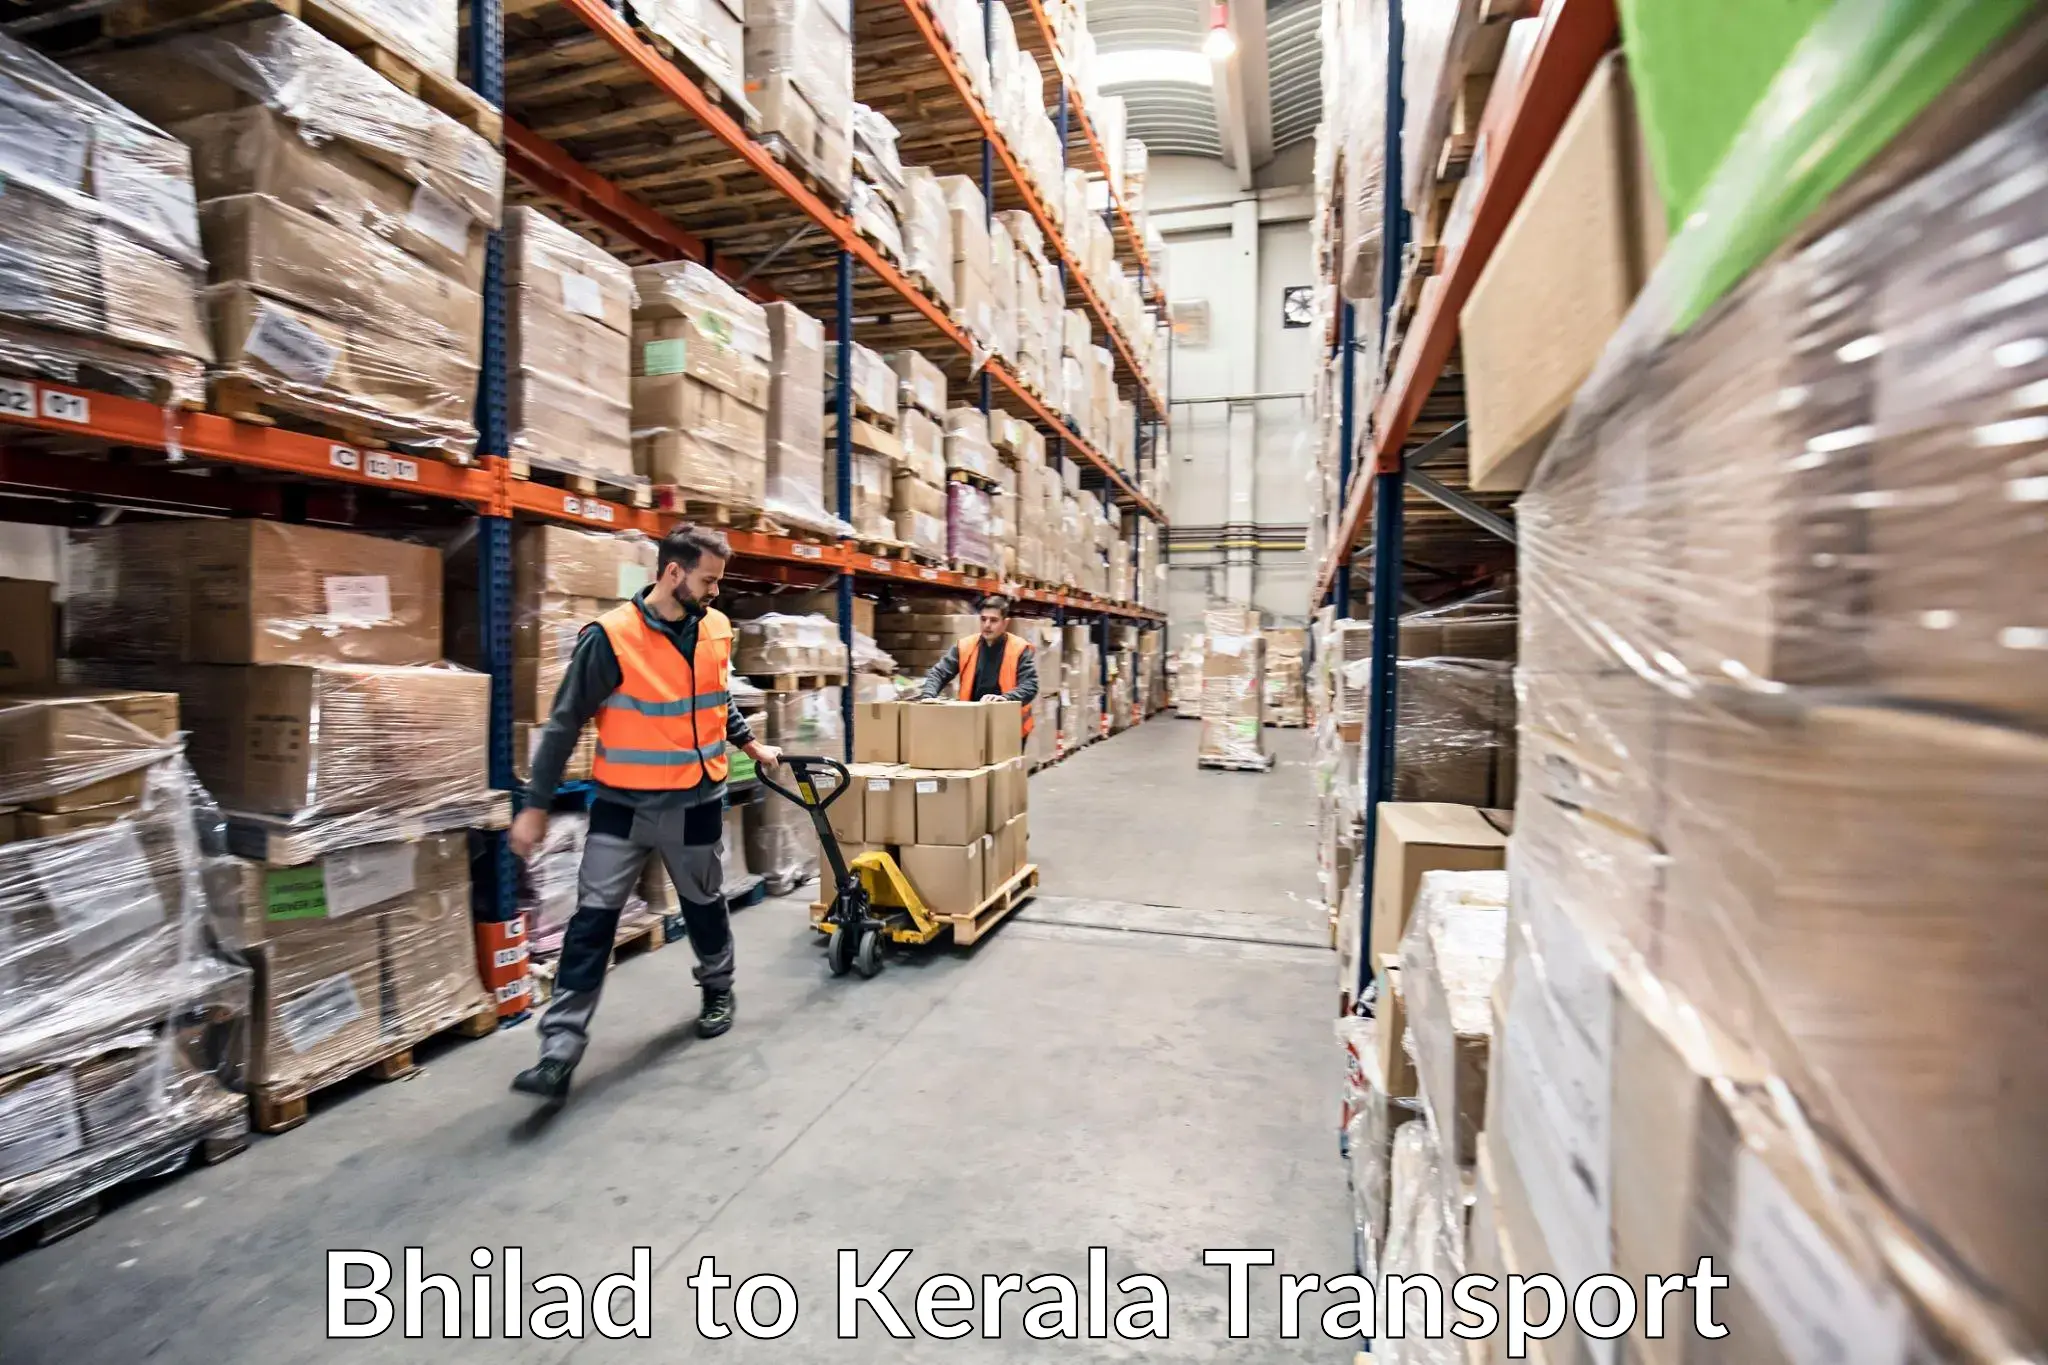 Shipping services Bhilad to Koothattukulam